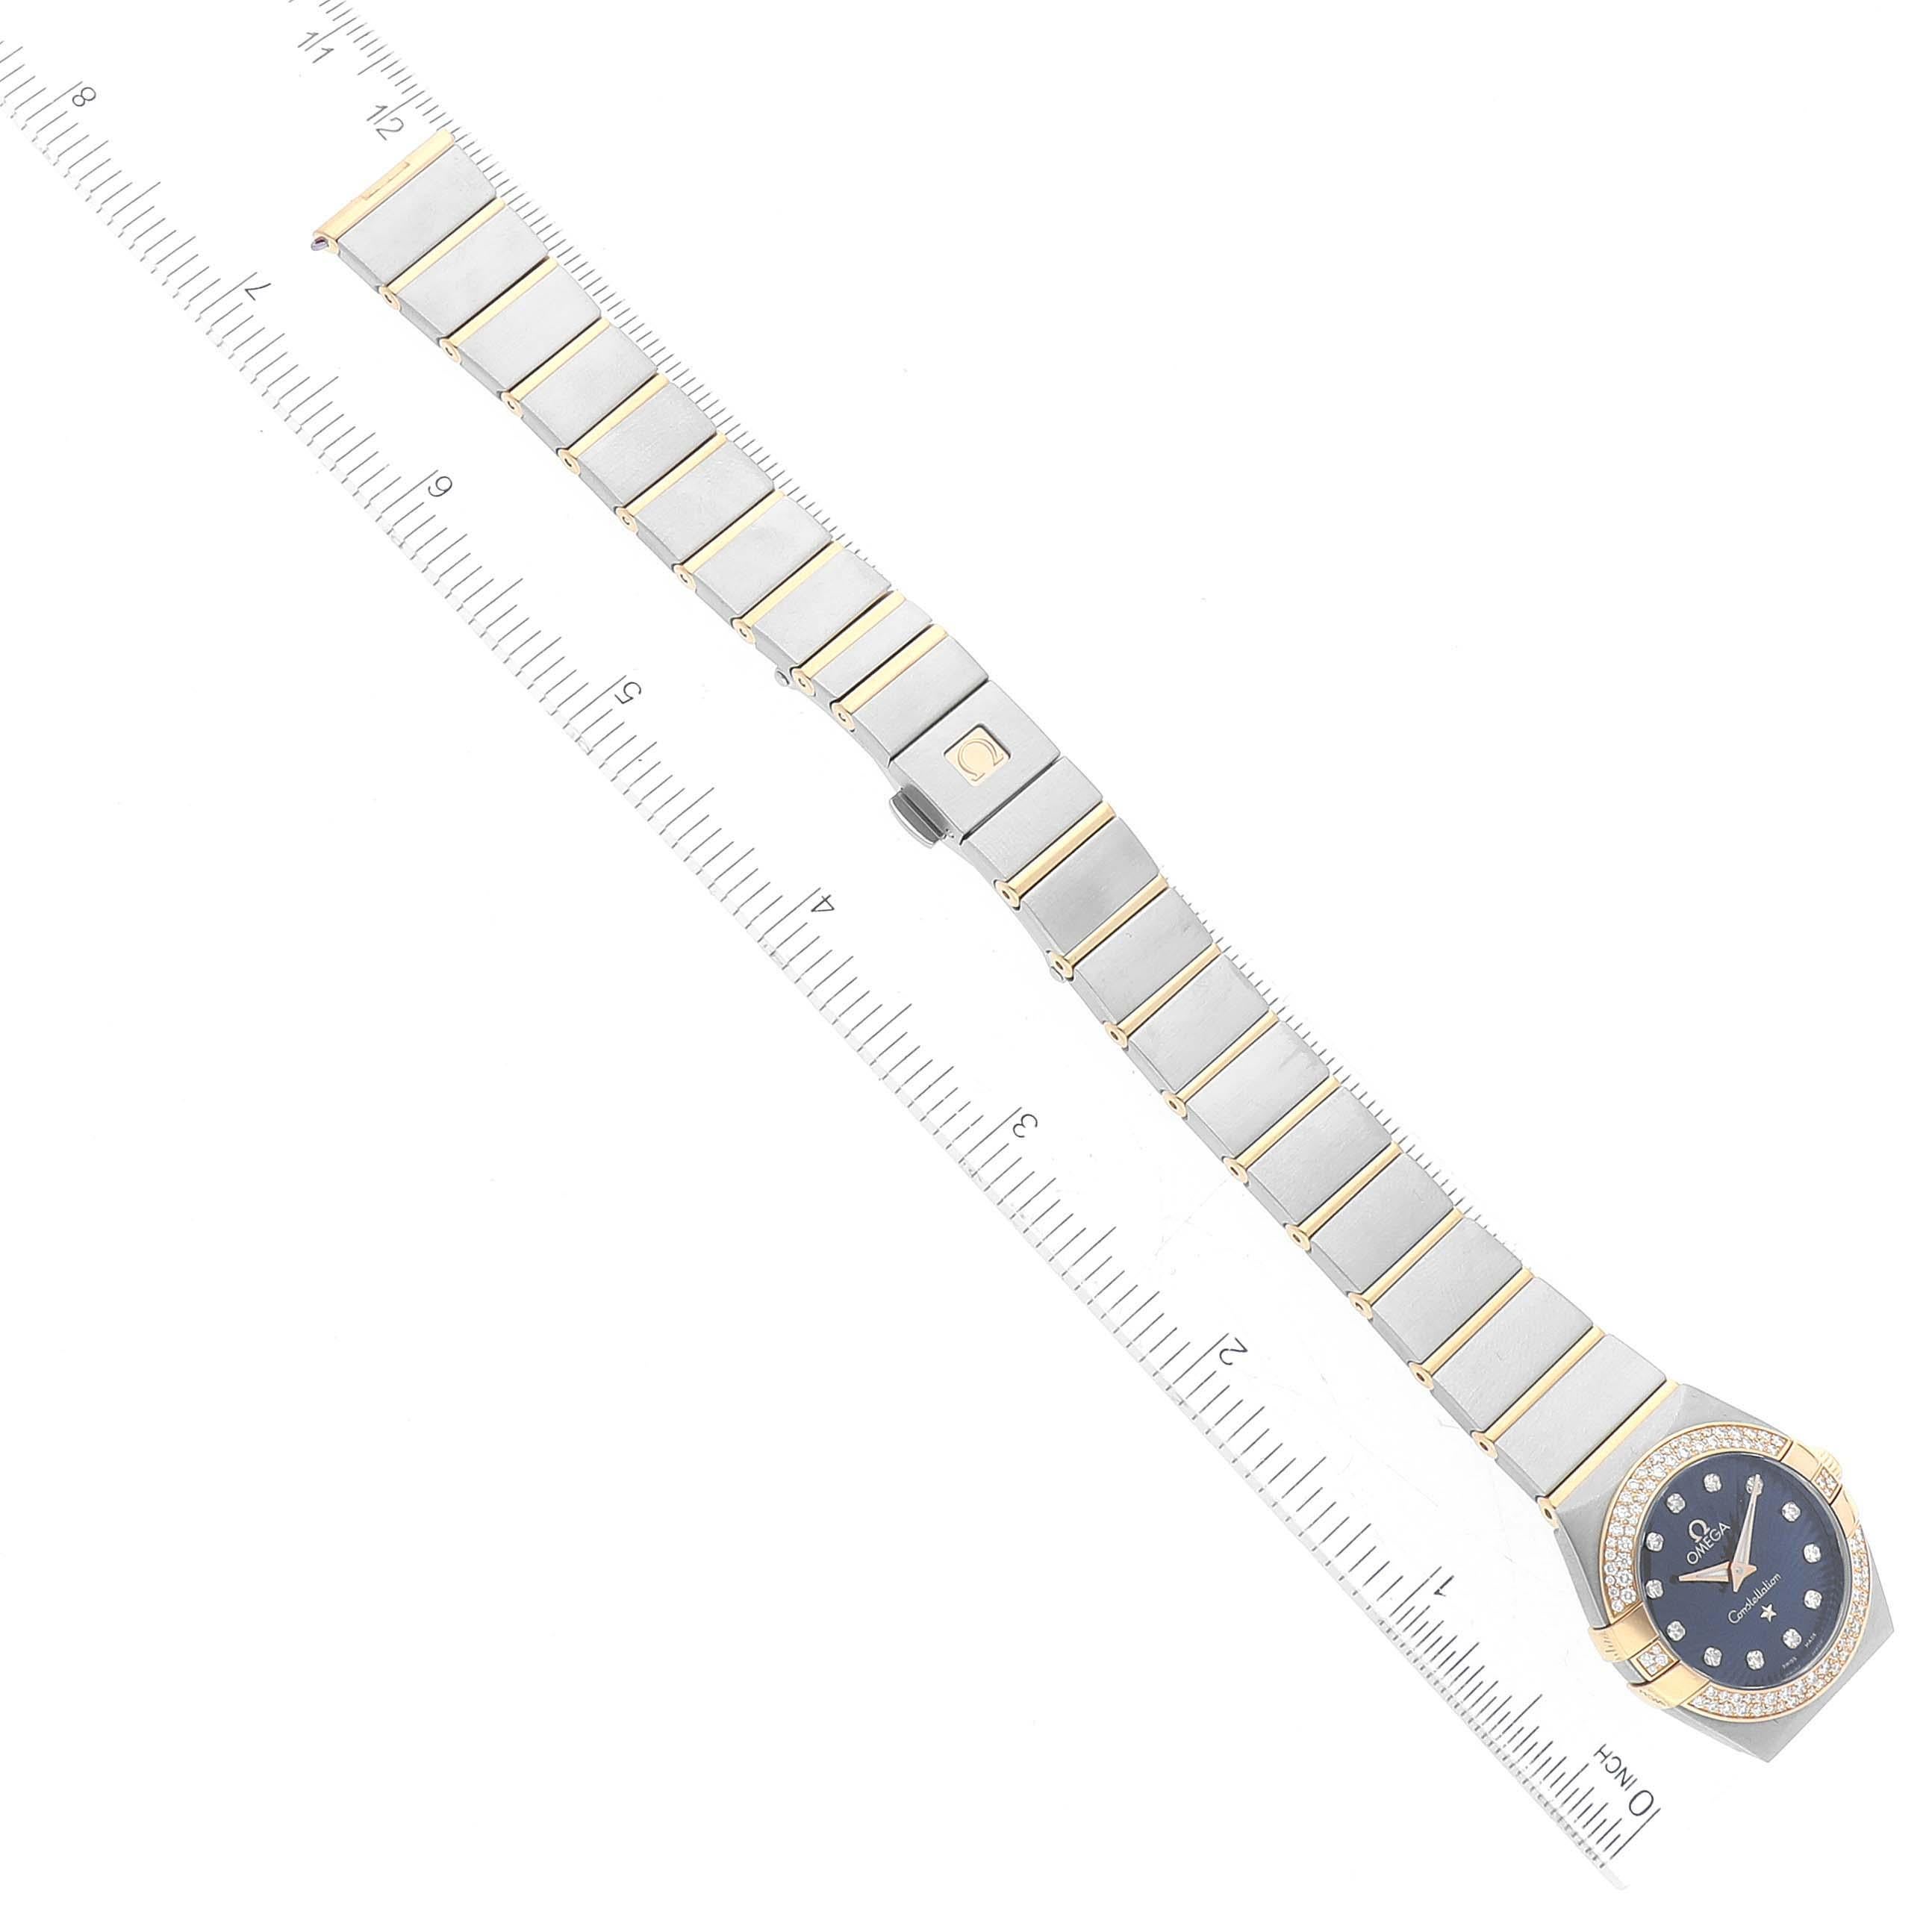 Omega Constellation Steel Rose Gold Diamond Ladies Watch 123.25.24.60.53.001 For Sale 4